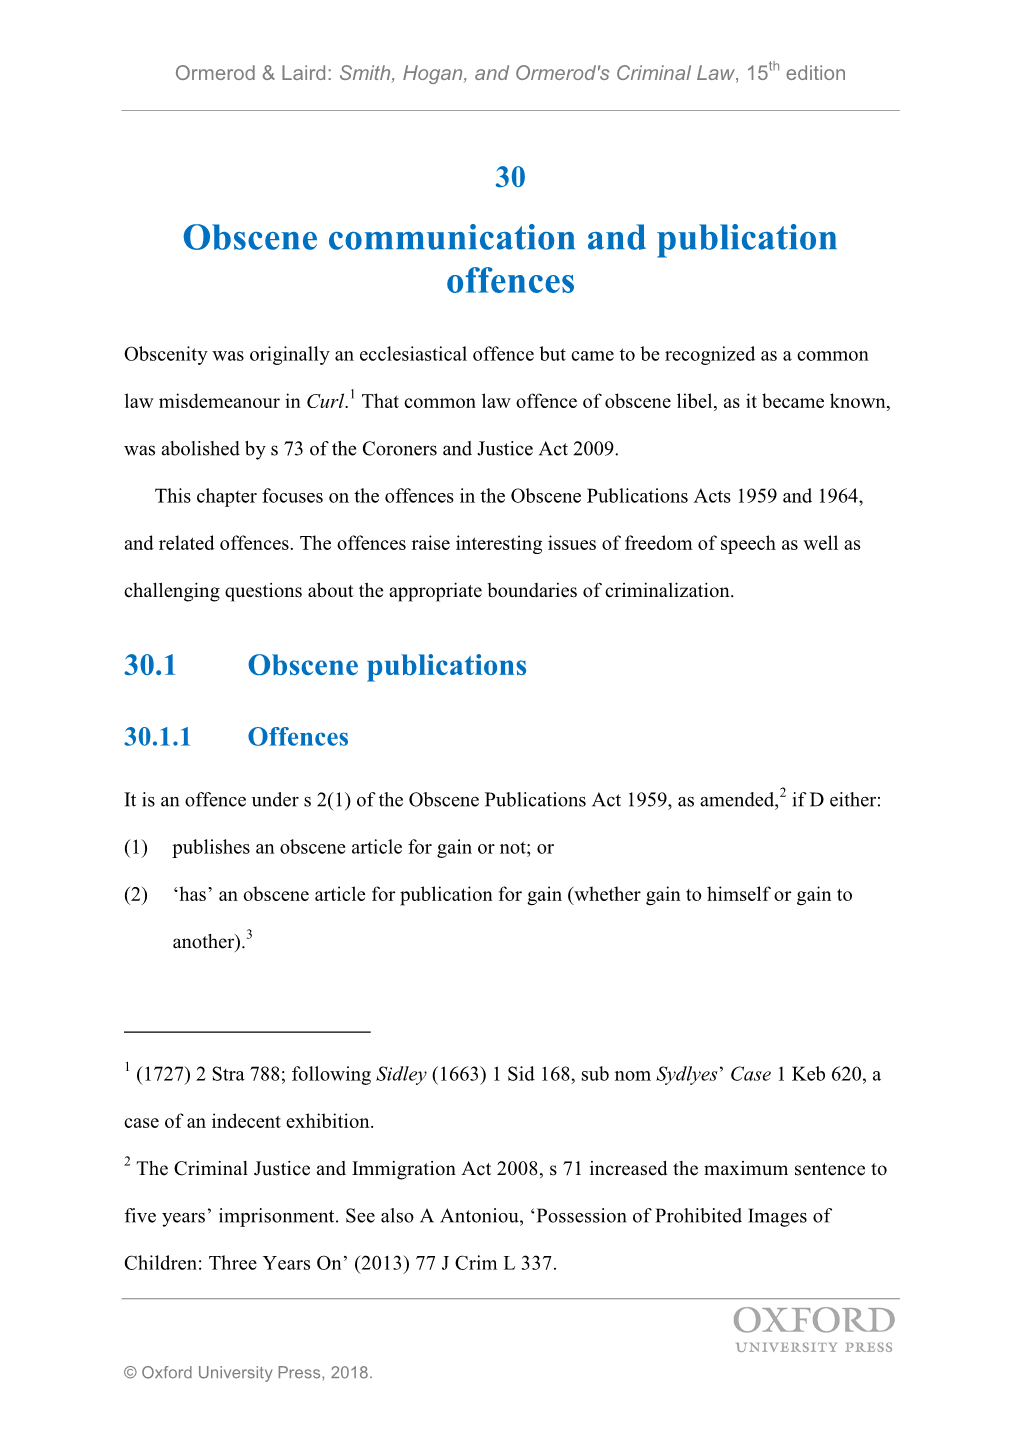 Obscene Communication and Publication Offences